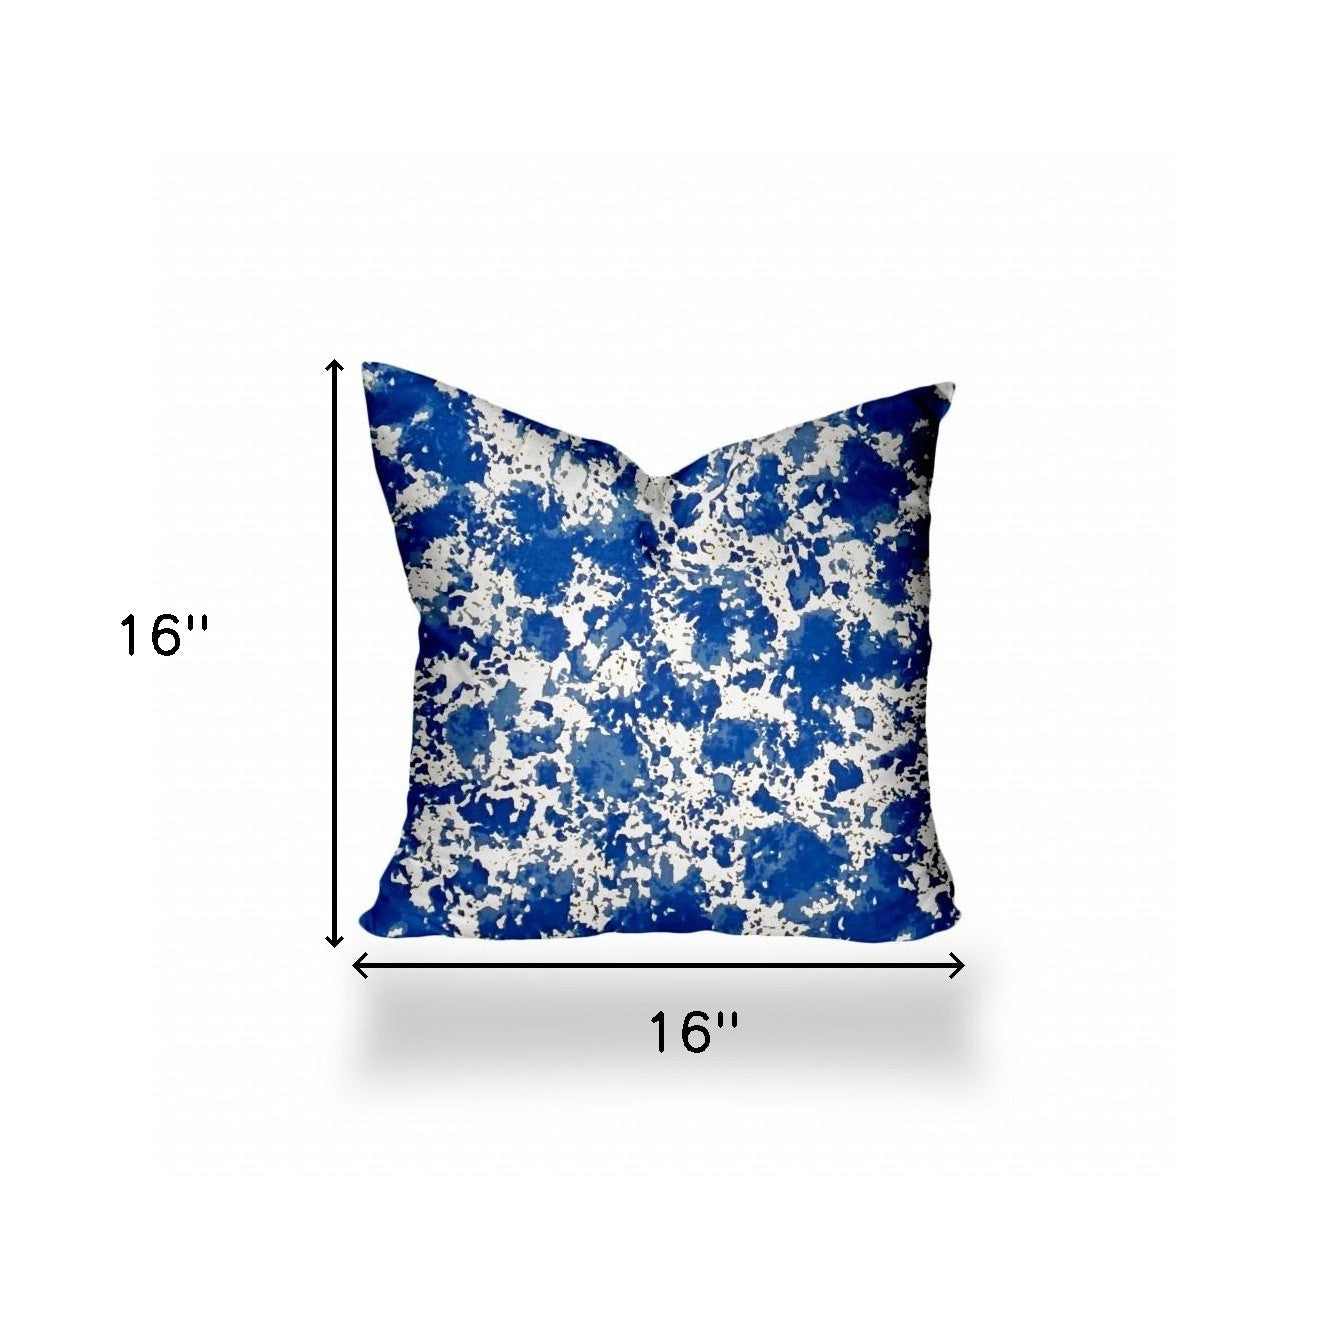 16" X 16" Blue And White Enveloped Coastal Throw Indoor Outdoor Pillow